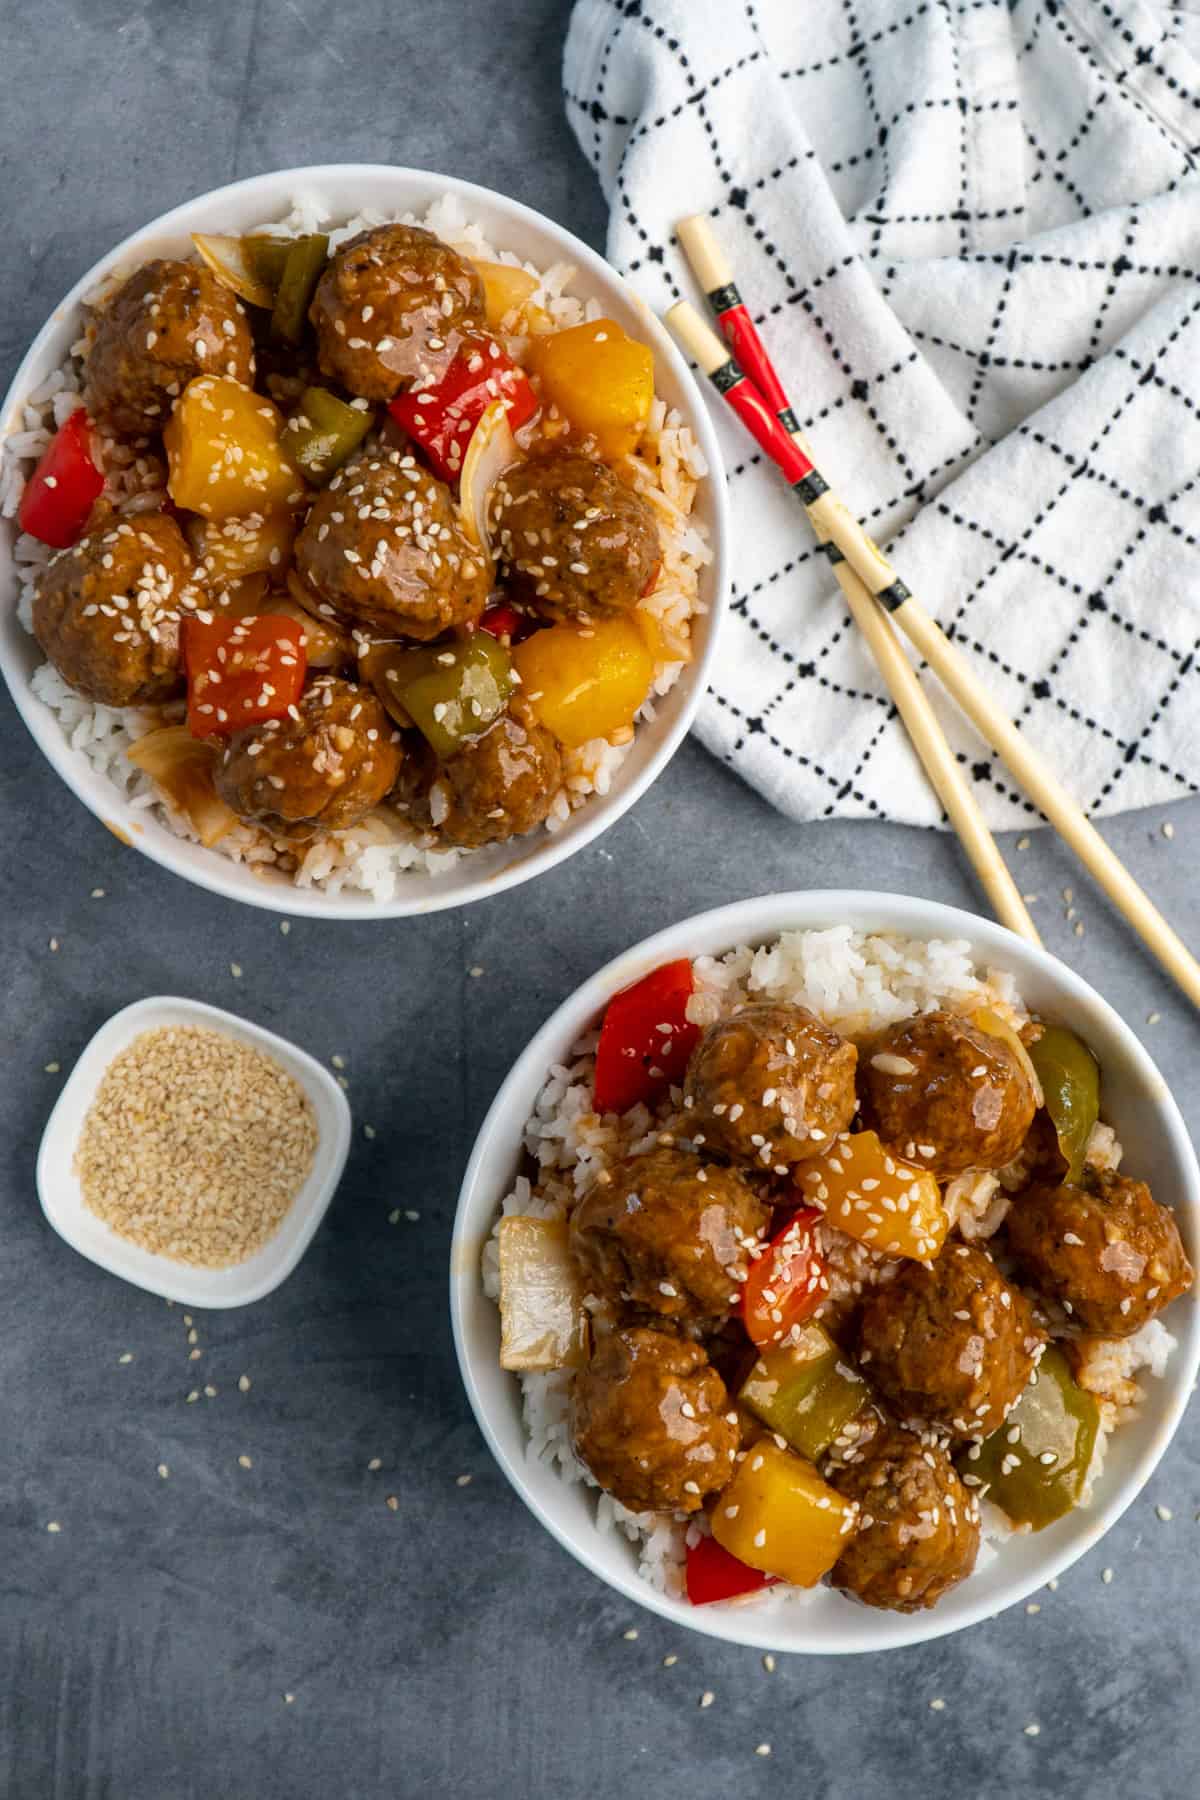 Overhead look at two white bowls of Crock-Pot sweet and sour meatballs garnished with sesame seeds.